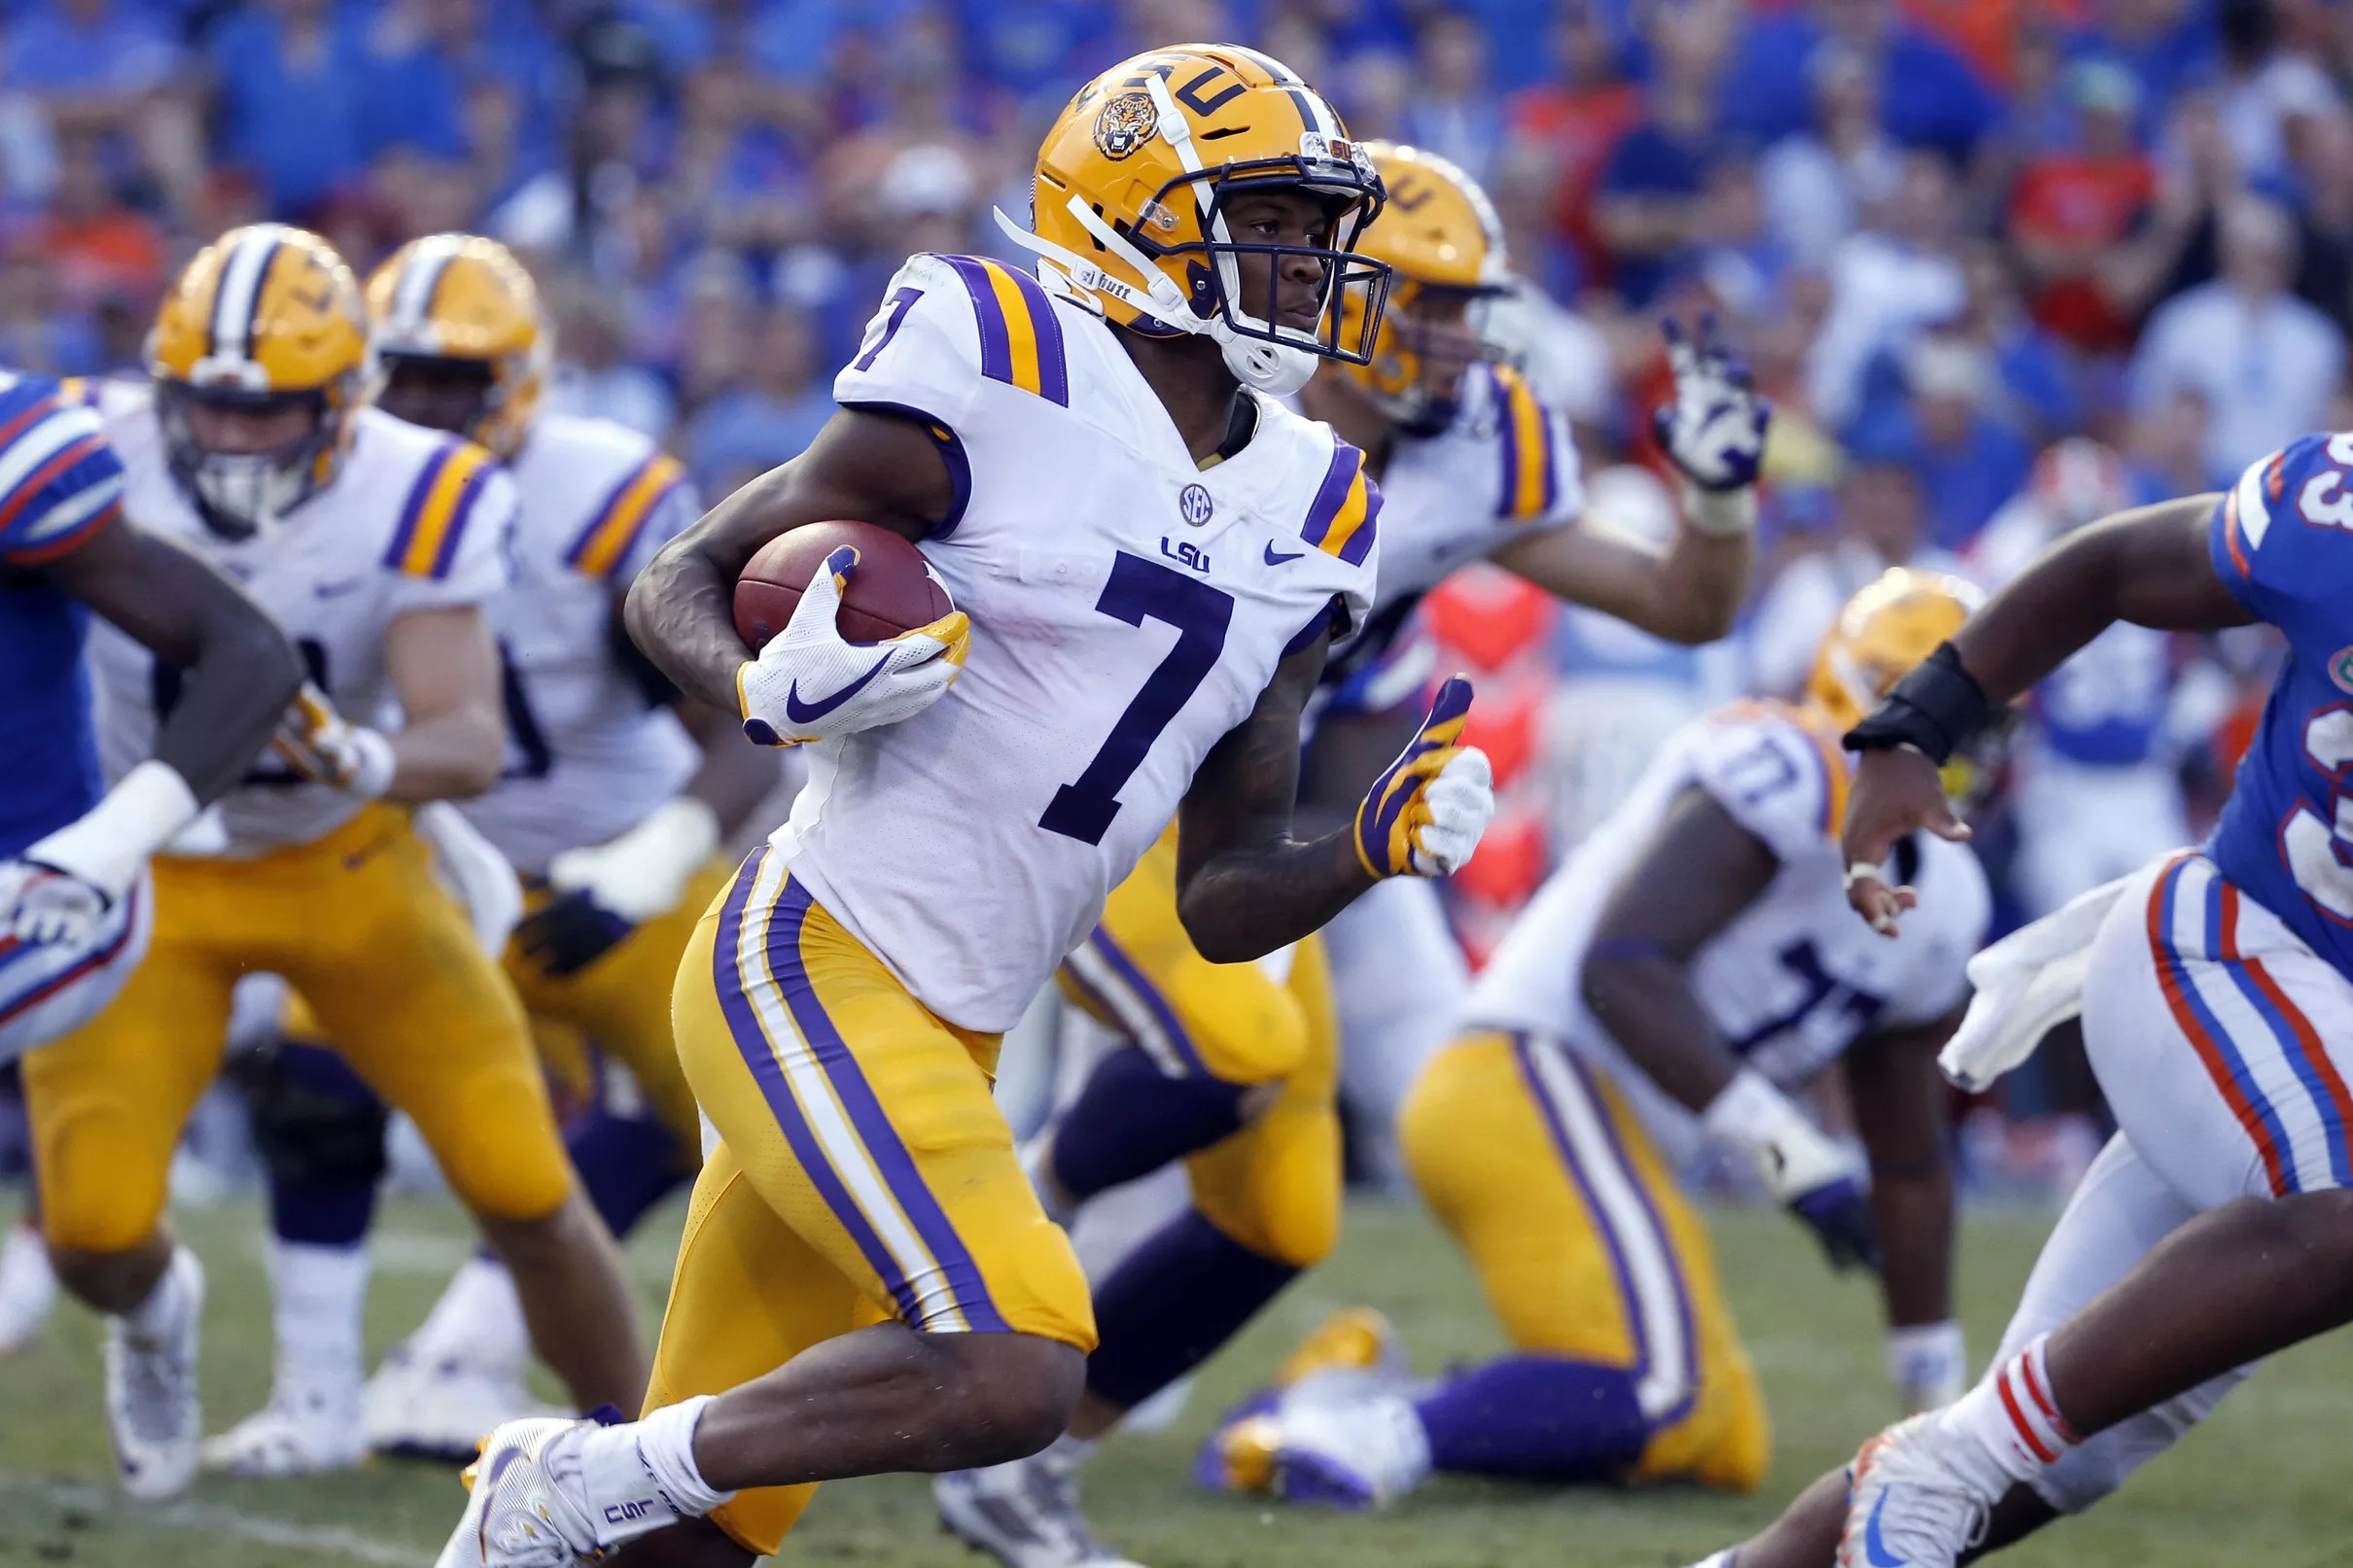 LSU vs. Auburn What to Watch For